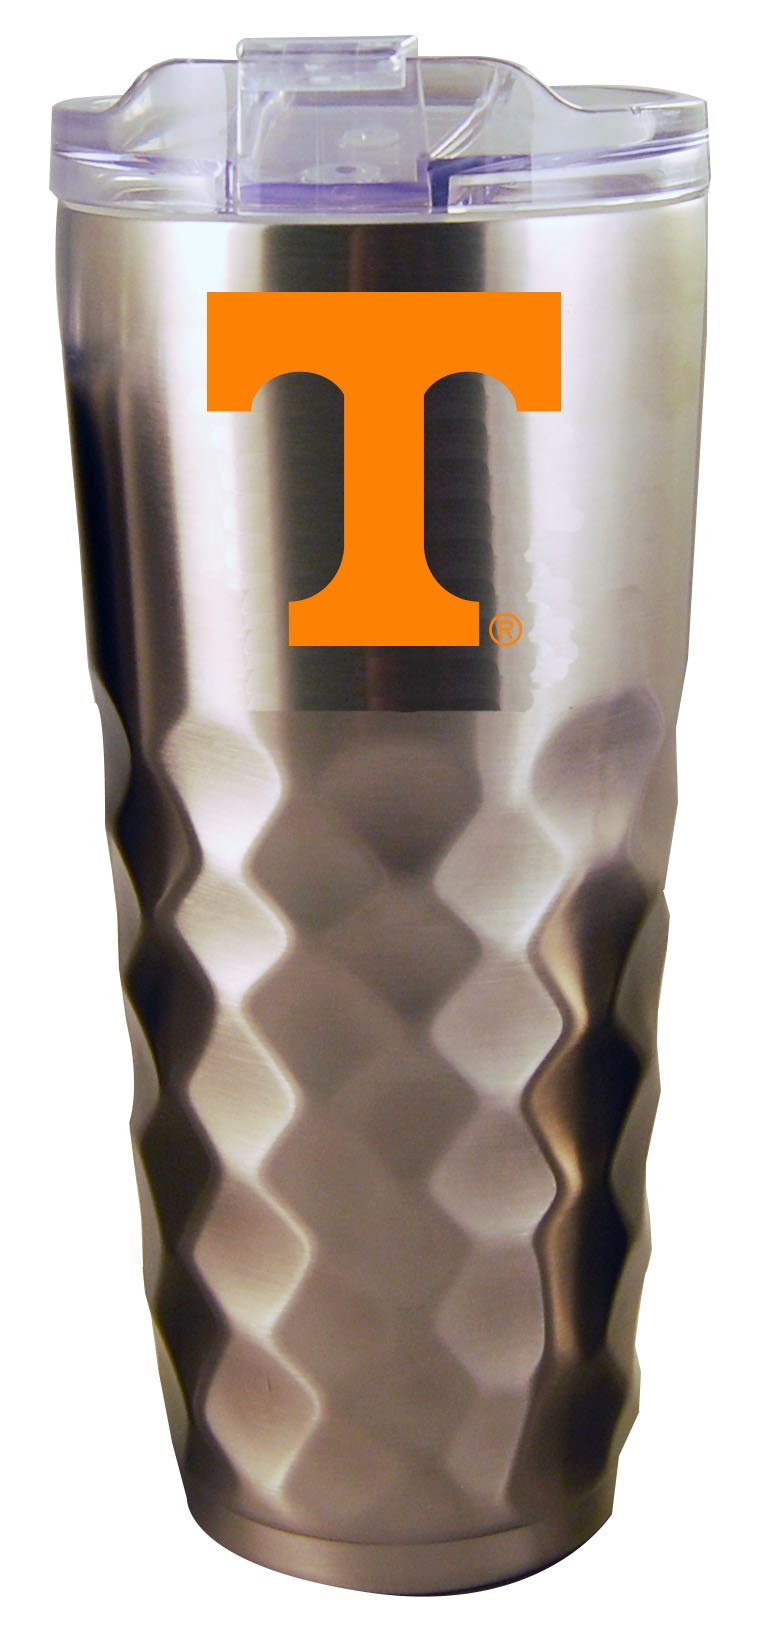 32OZ SS DIAMD TMBLR TENNESSEE
COL, CurrentProduct, Drinkware_category_All, Tennessee Vols, TN
The Memory Company